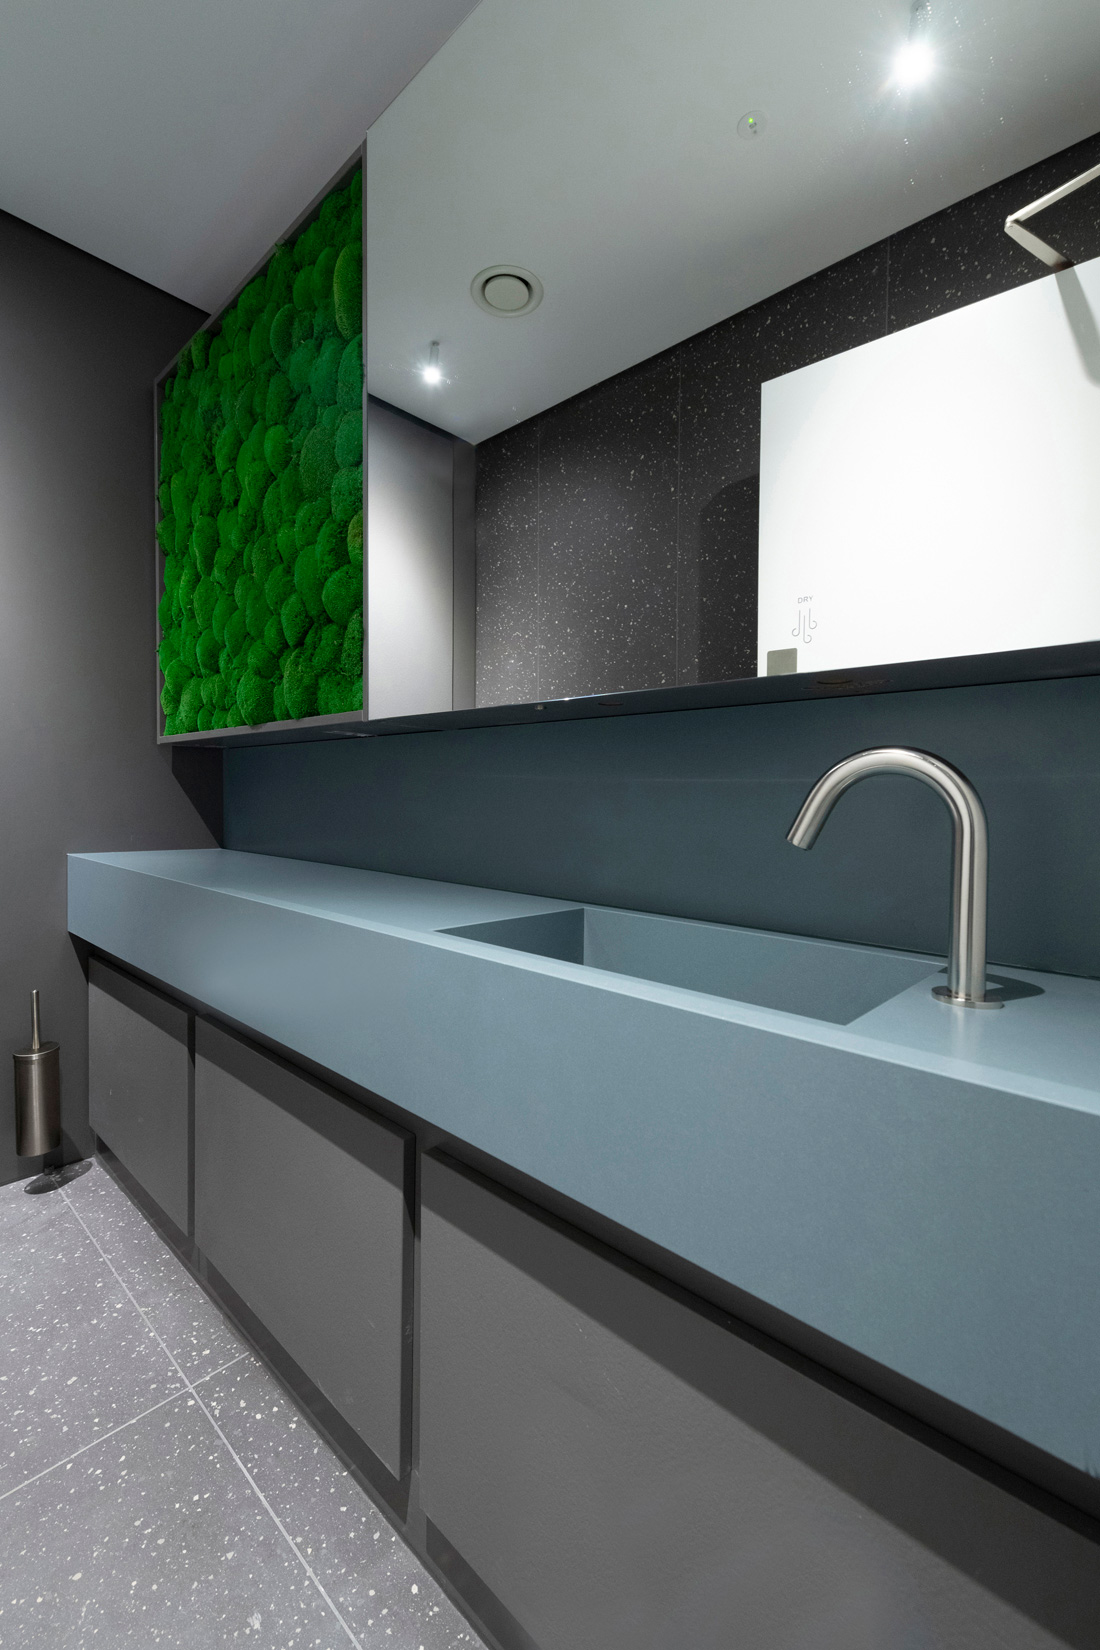 Image of superloos 2 in Sustainable washbasins in Mediterranean colours and modern design for the groundbreaking Superloo bathrooms - Cosentino